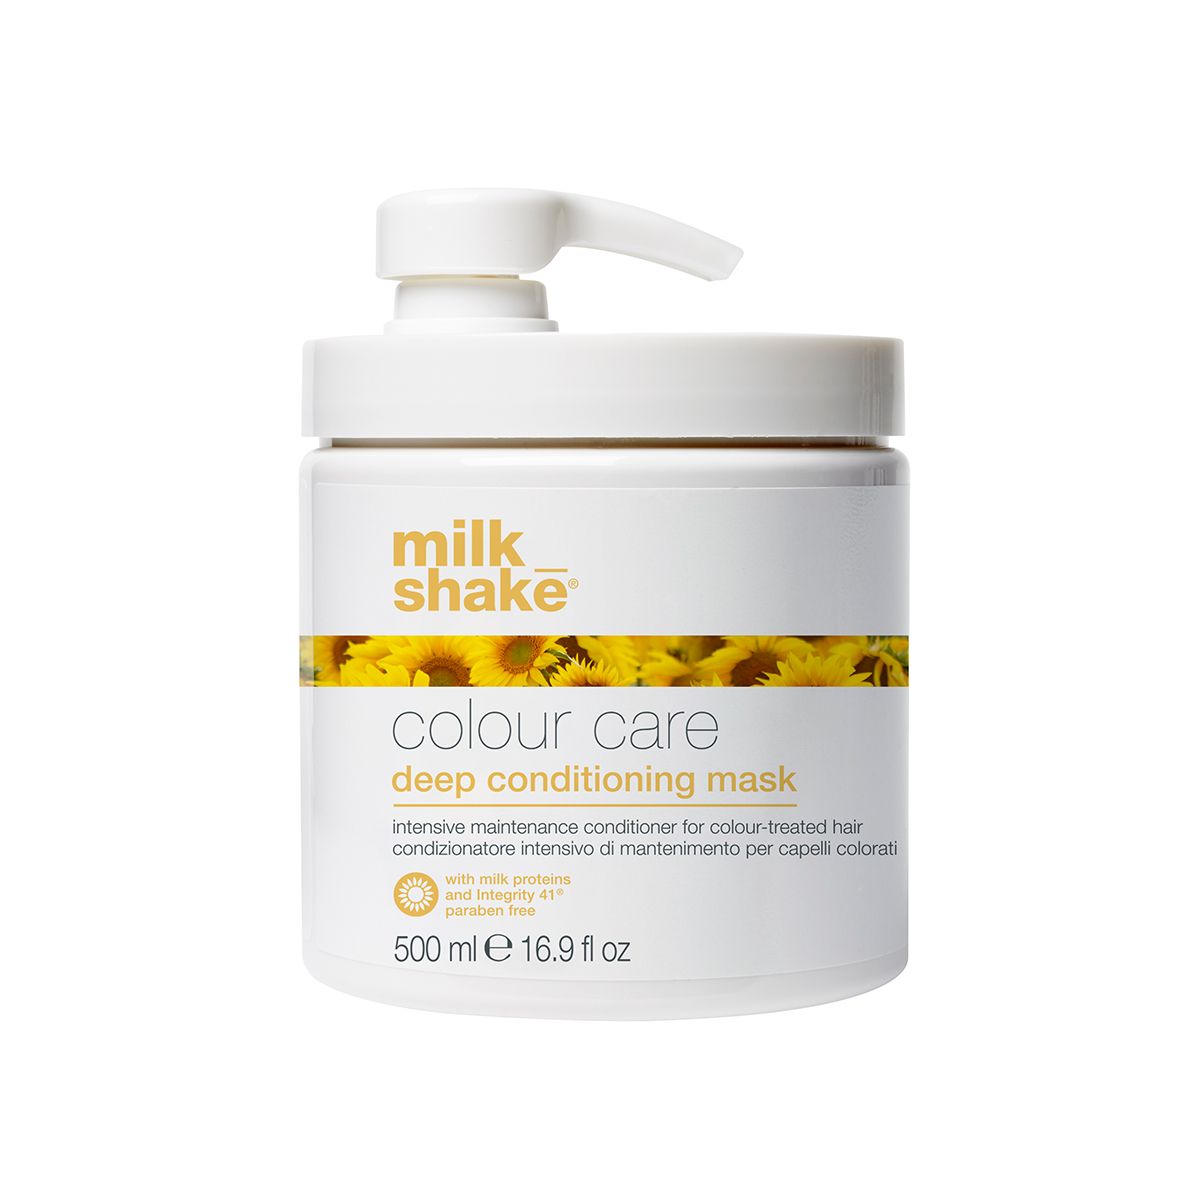 Milk Shake Haircare Color Maintainer Mask 500ml